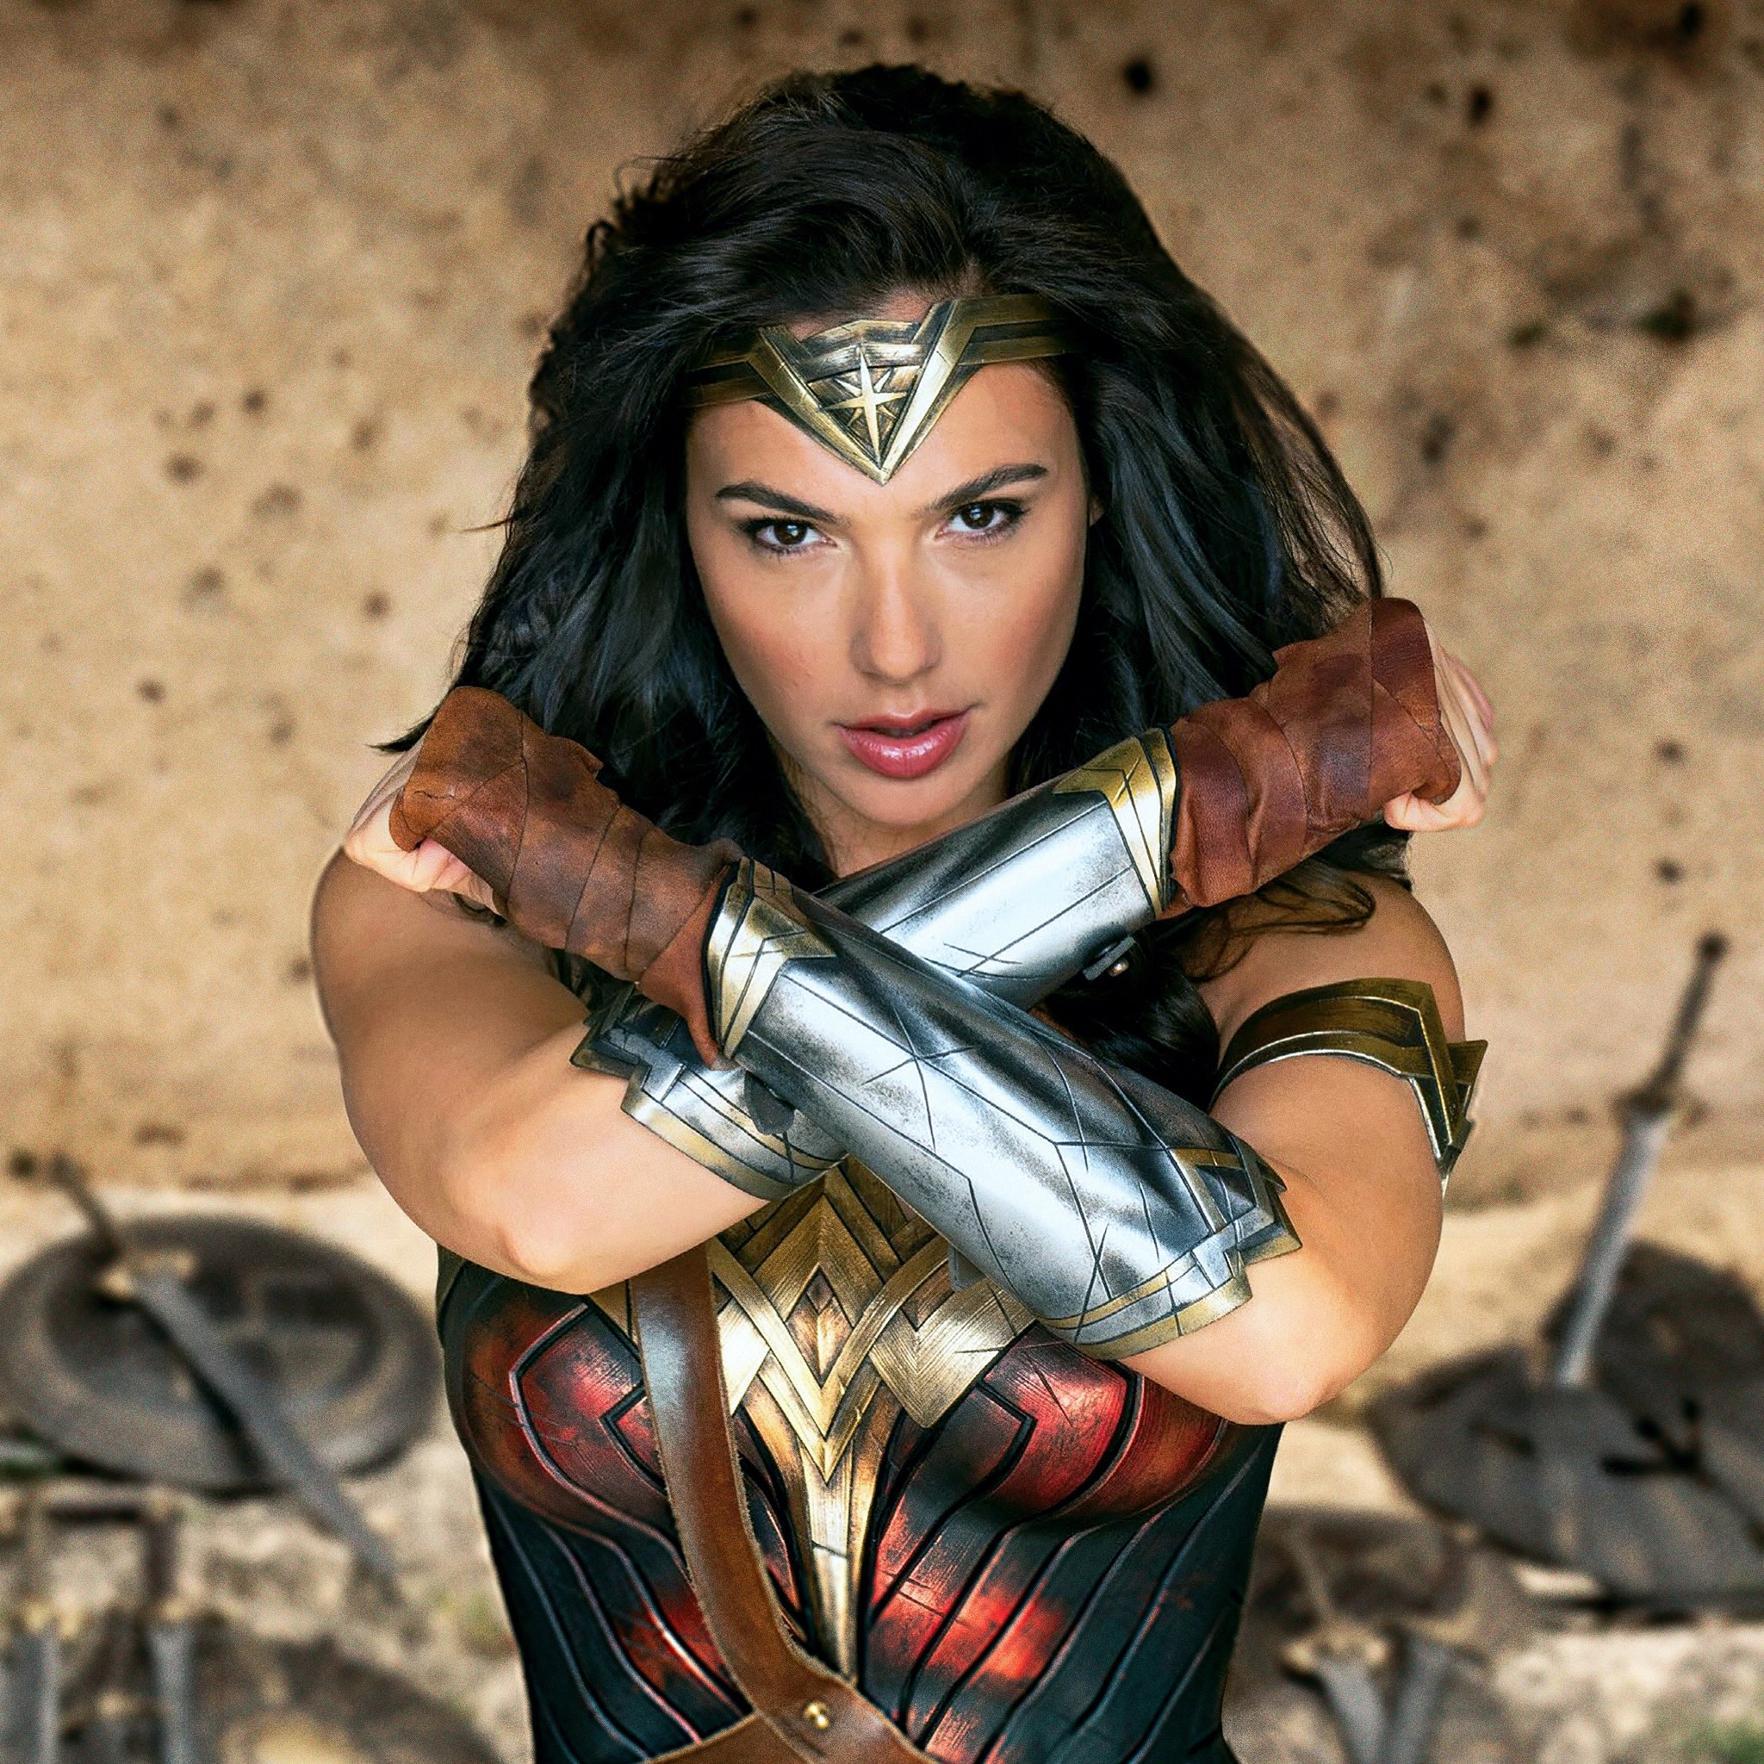 Which Wonder Woman Character Are You? - Personality Quiz